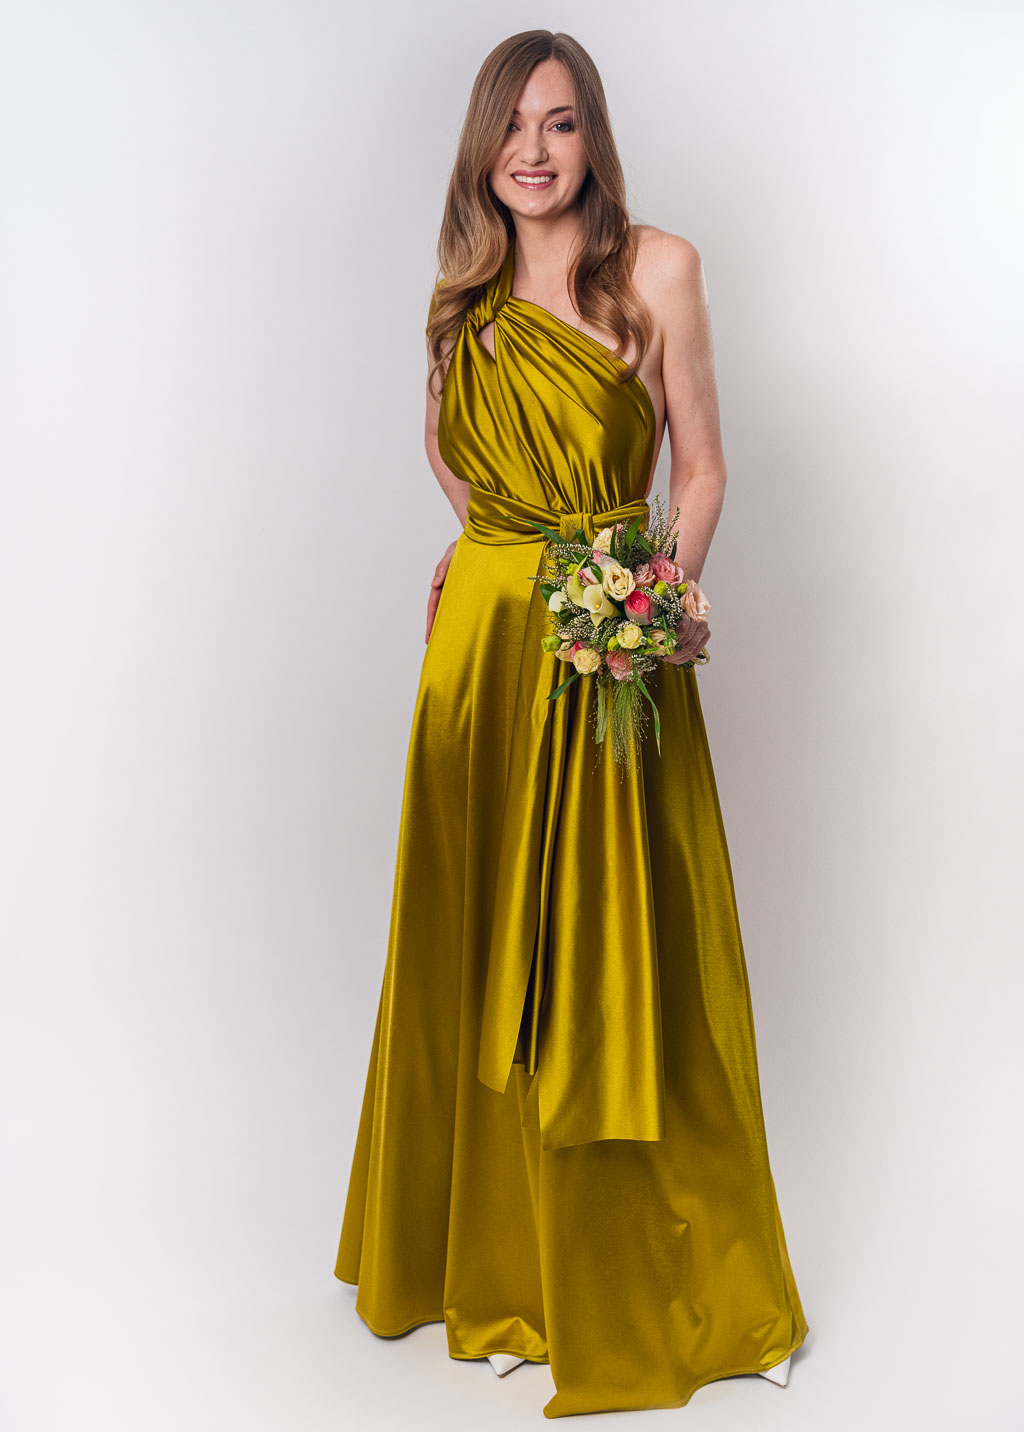 Olive green luxury satin infinity dress or jumpsuit